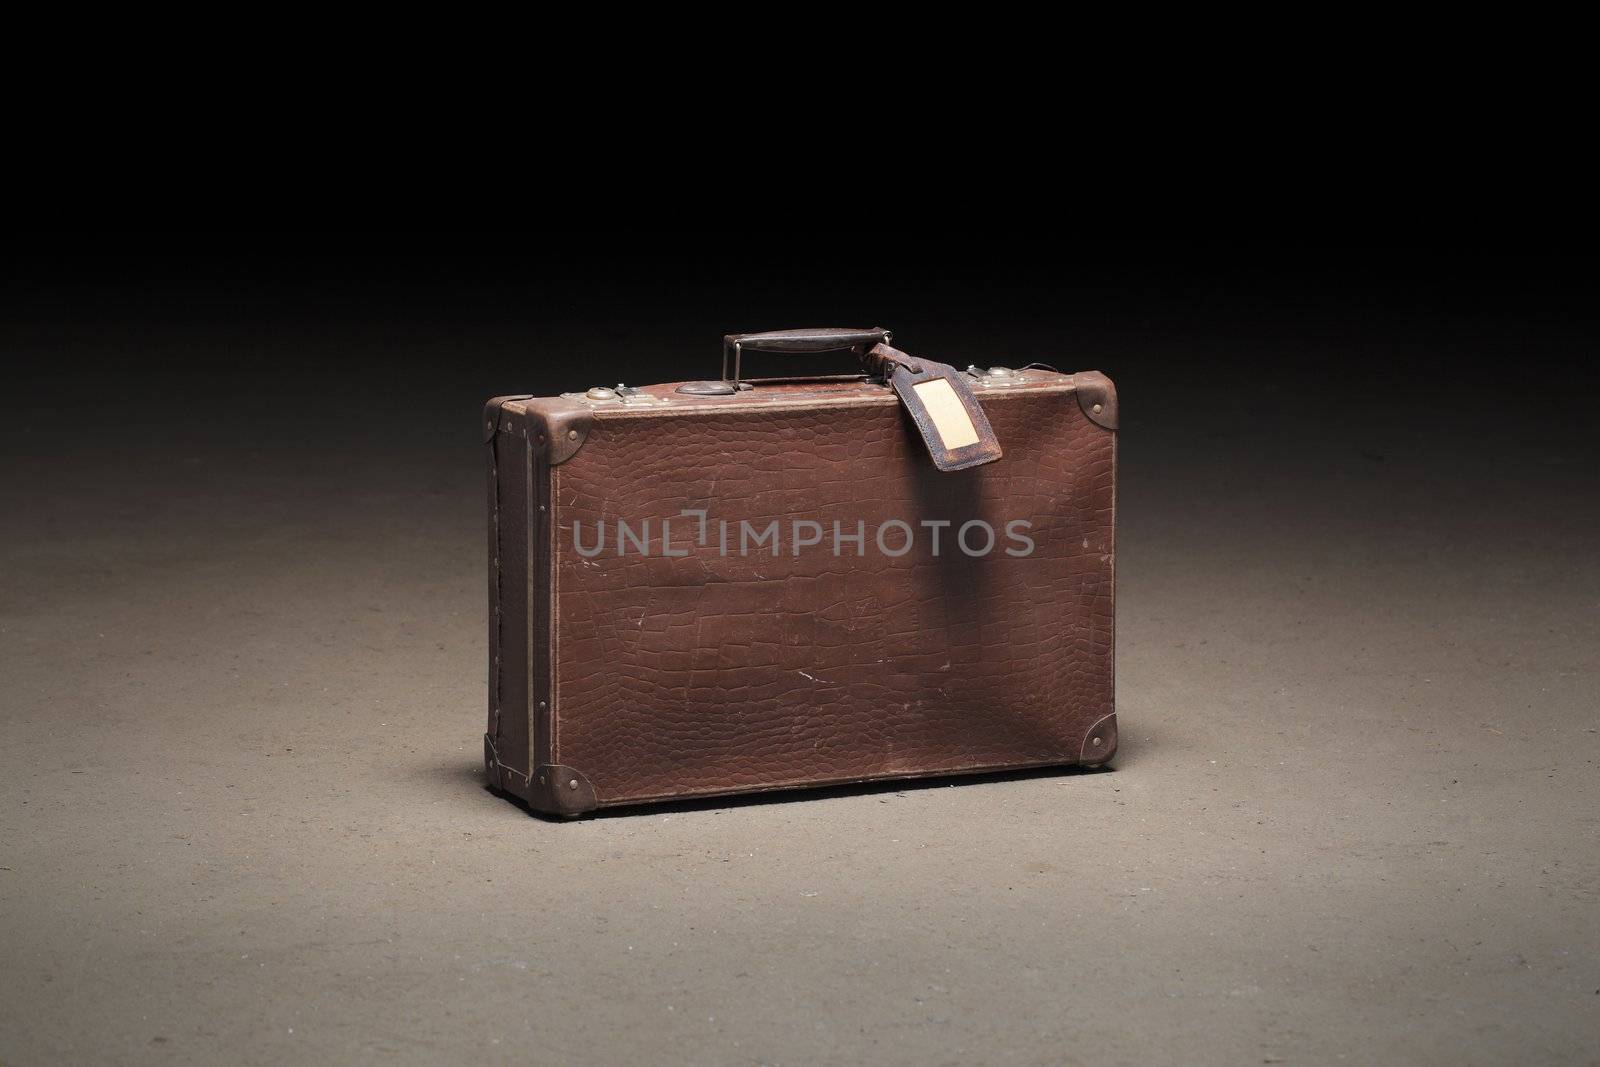 Old brown suitcase abandoned on dirty concrete floor